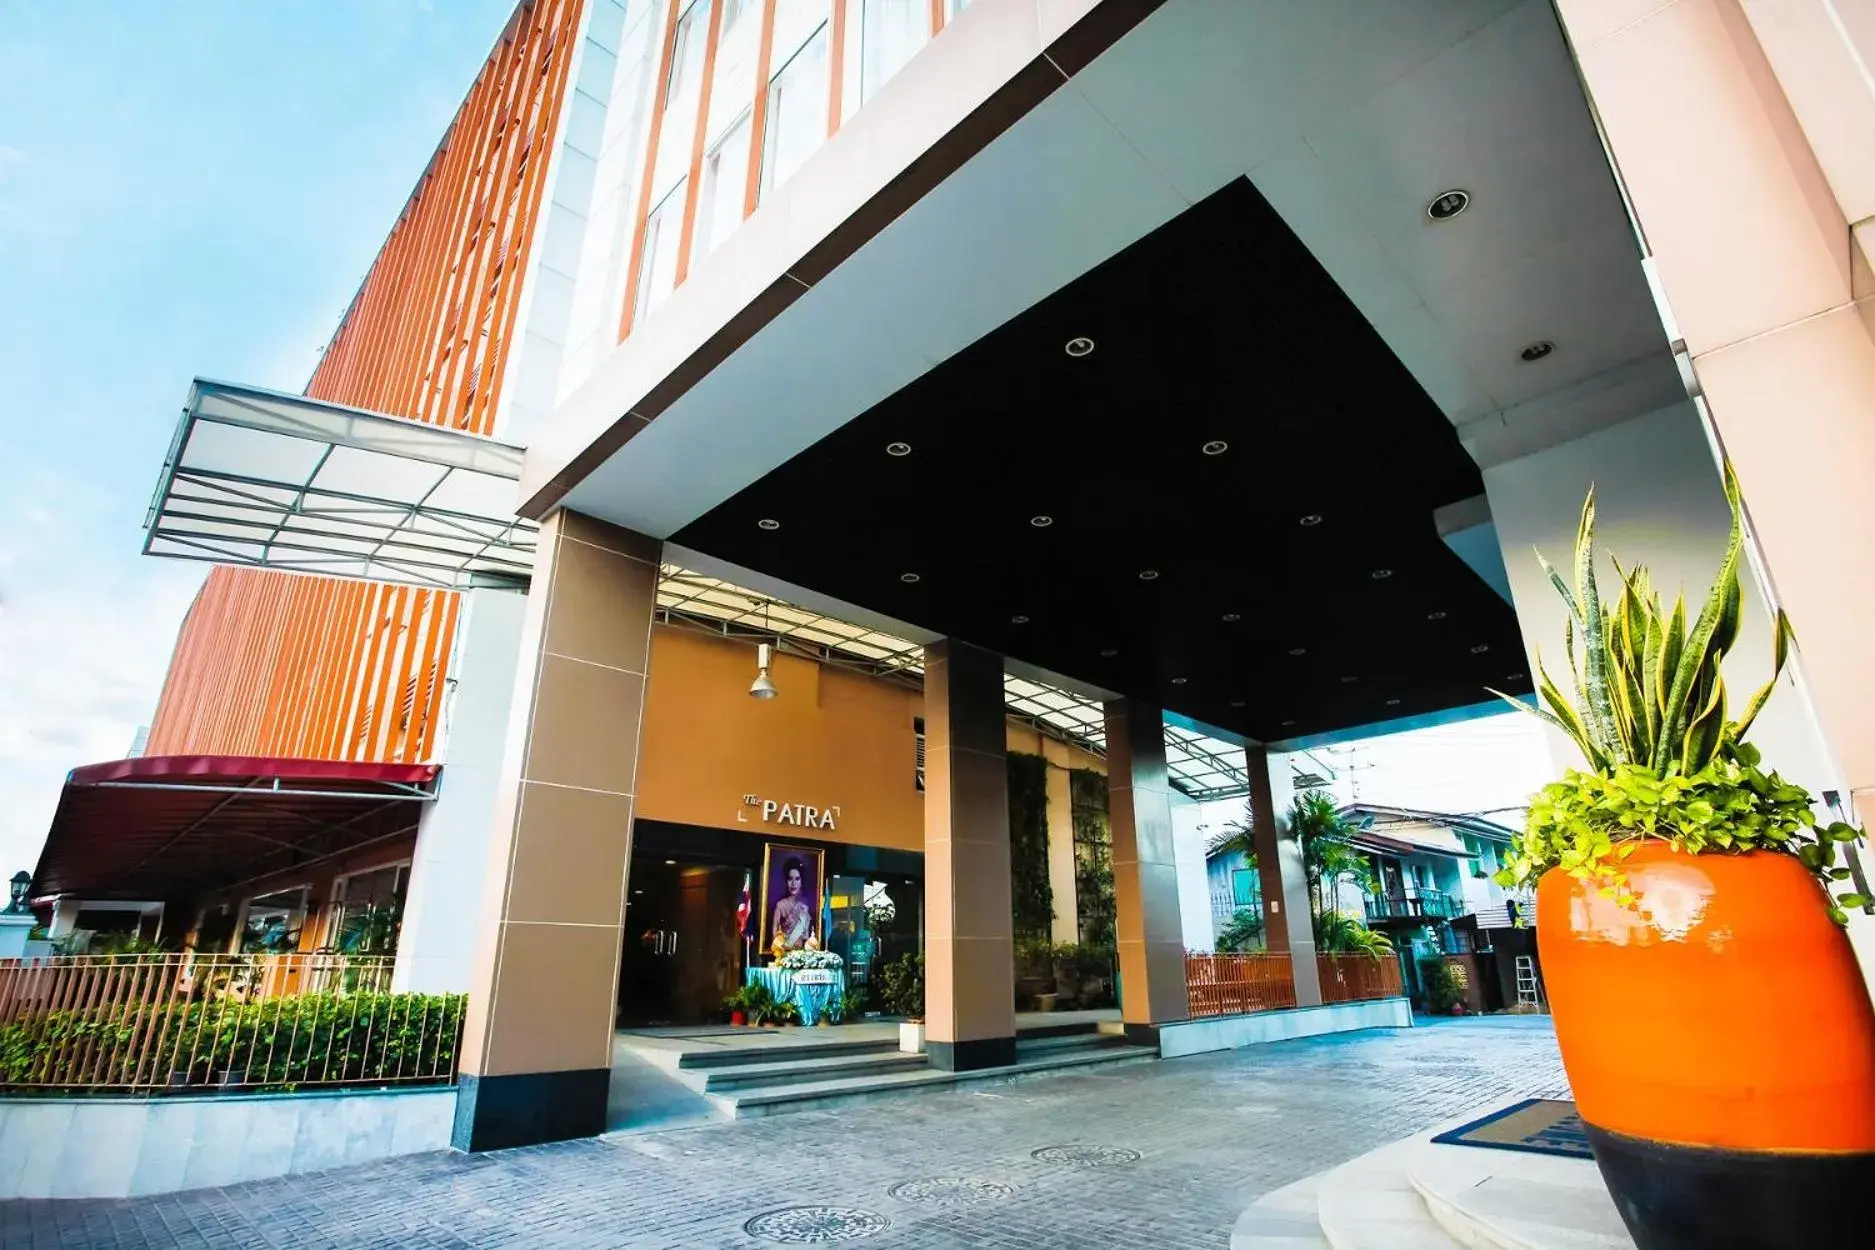 Property building in The Patra Hotel - Rama 9